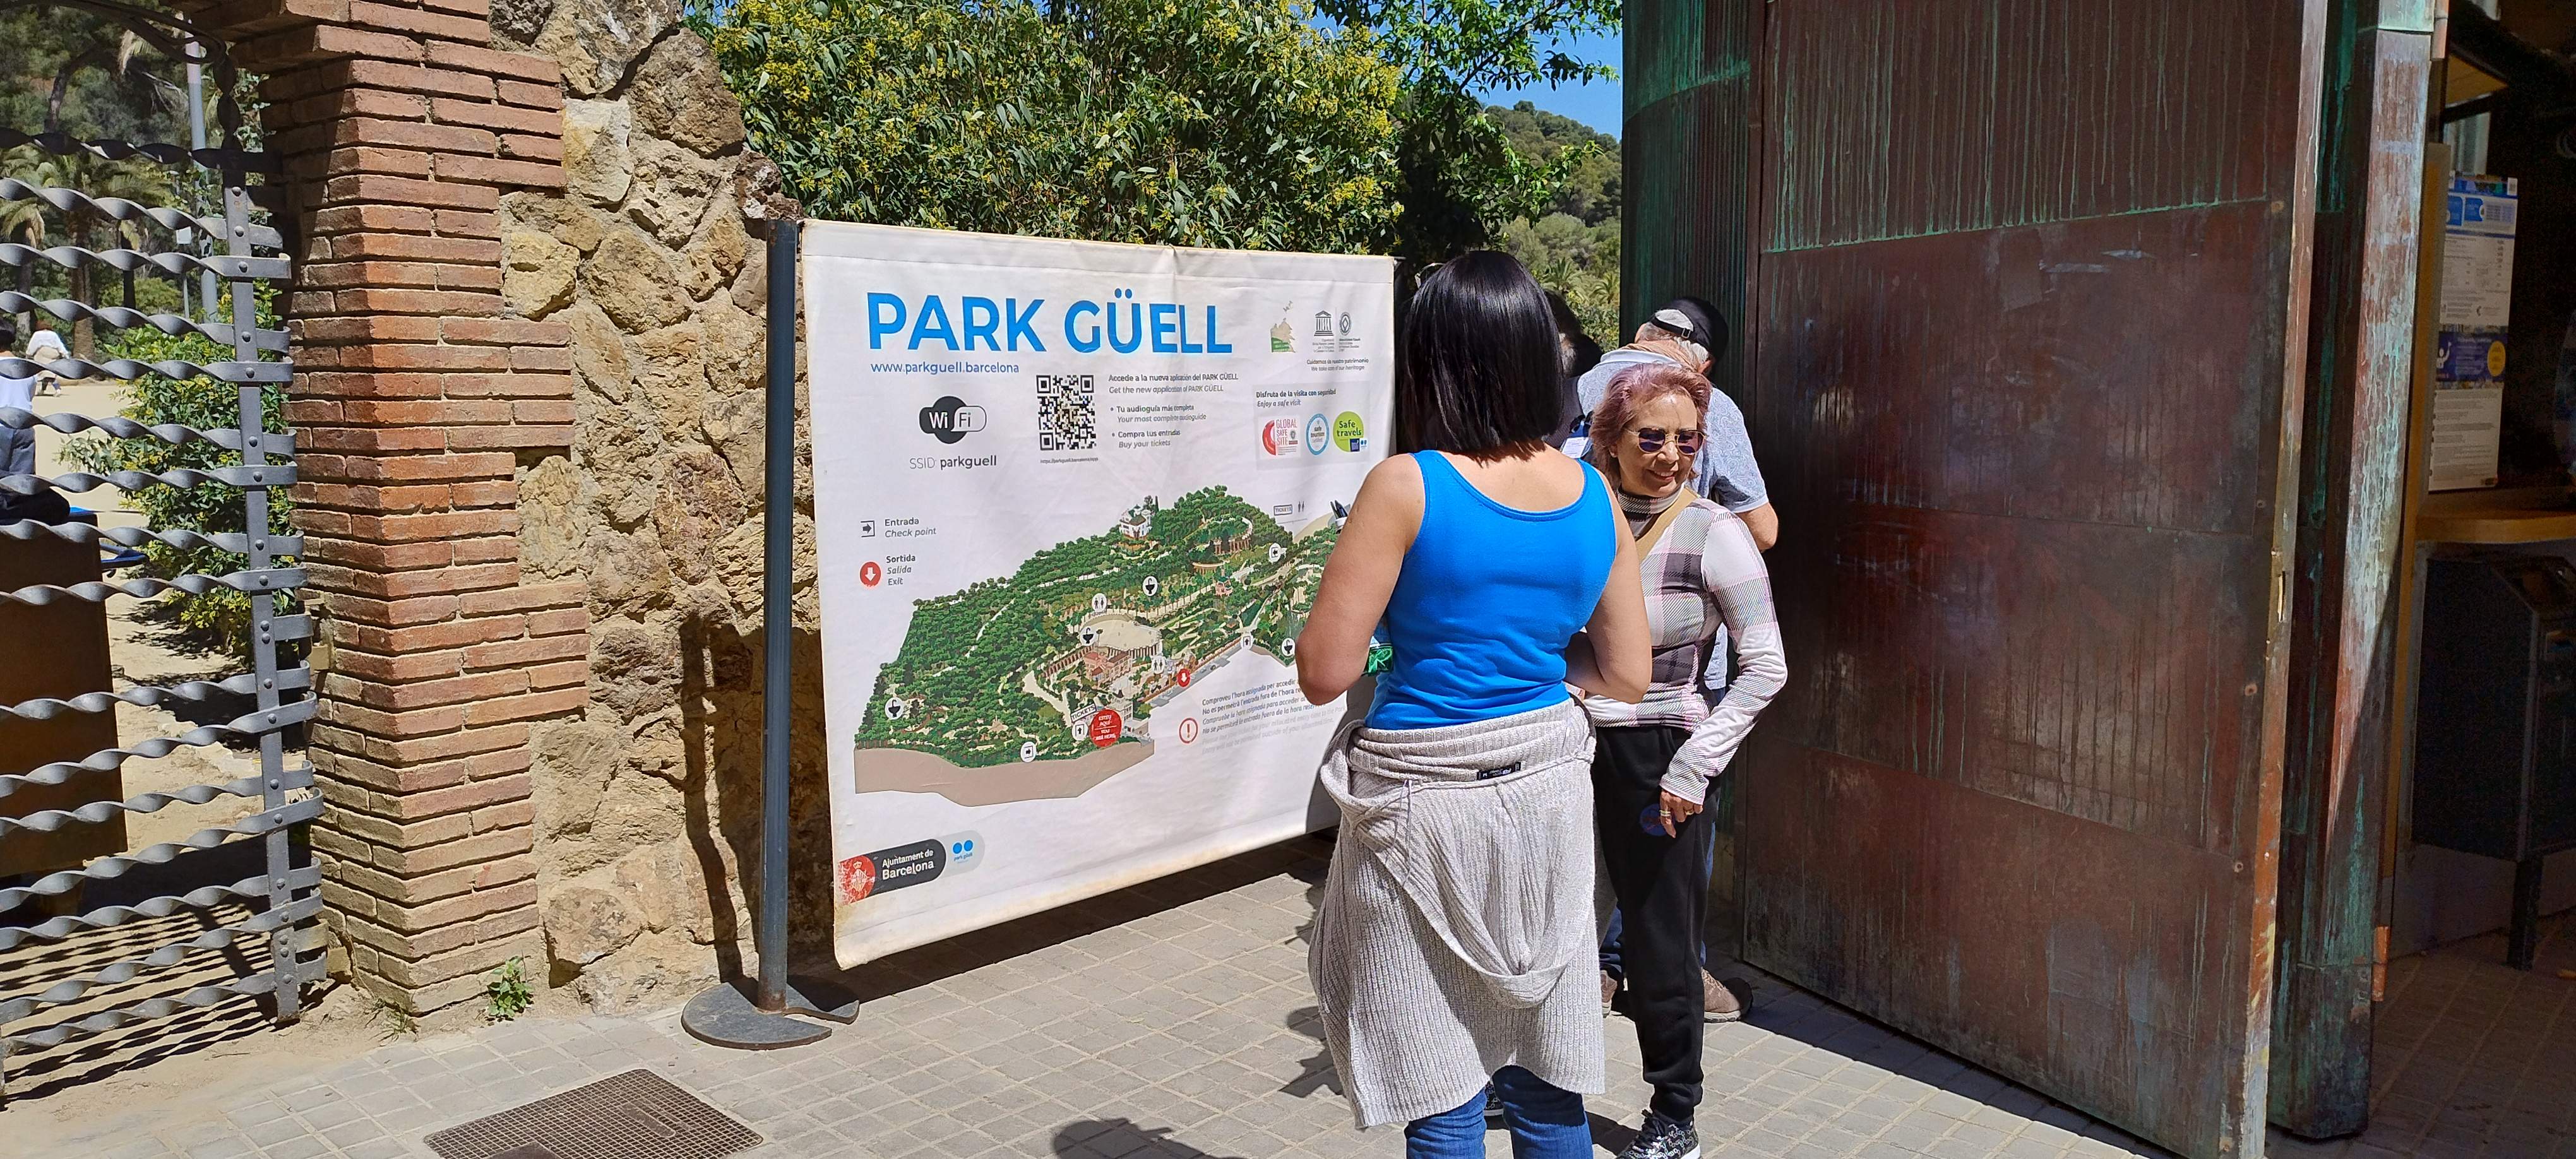 Barcelona's Park Güell:  the July 1st change for tourists that is intended to benefit residents